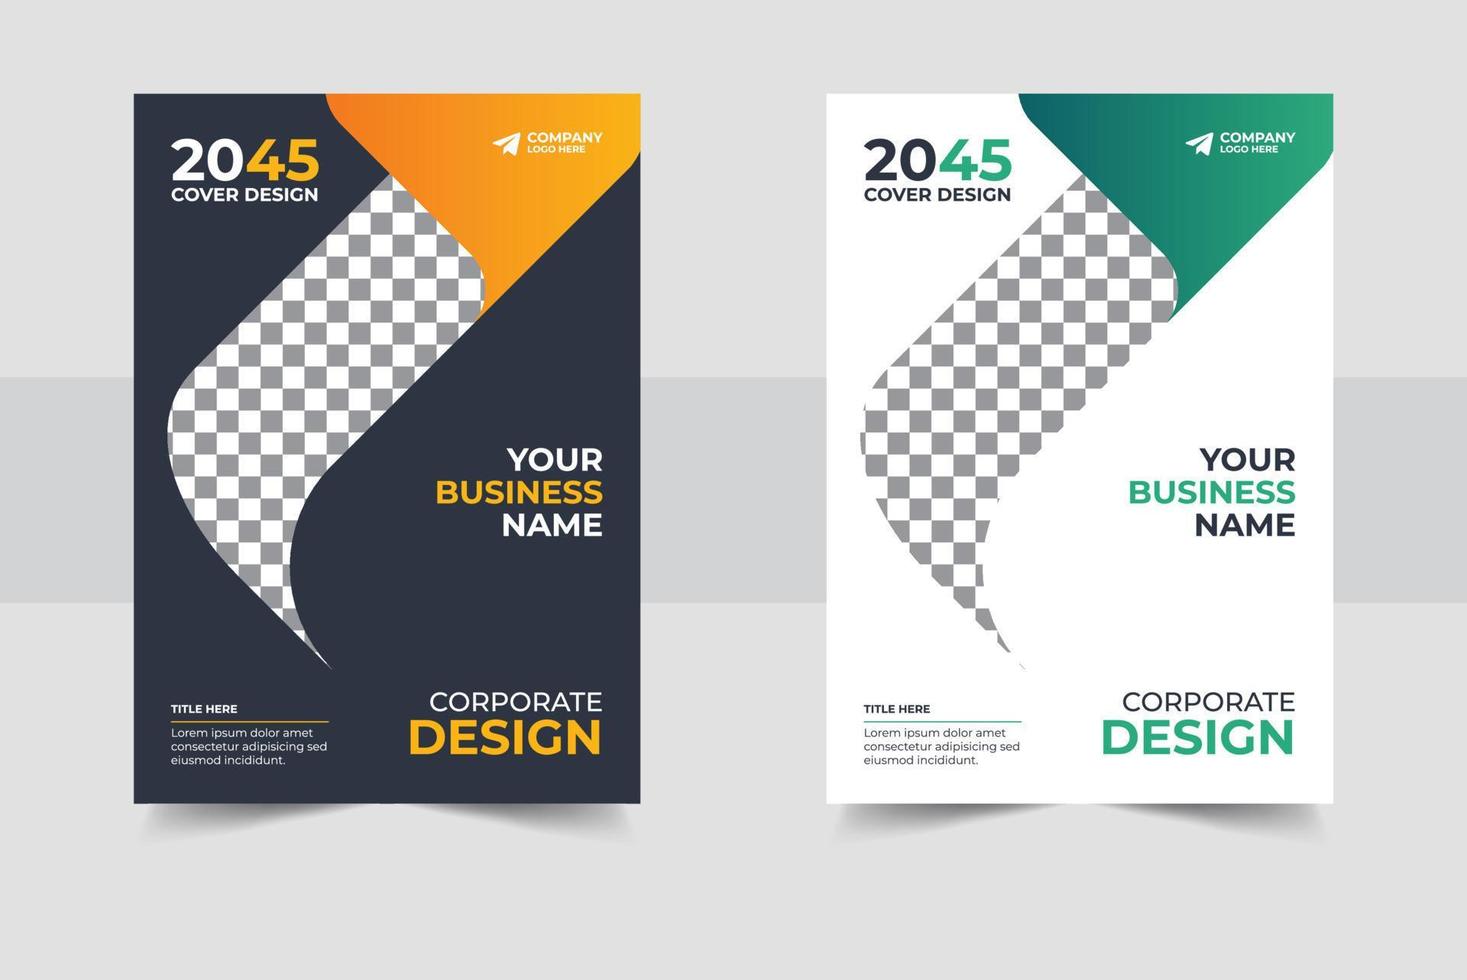 Corporate Book Cover Design Template in A4. Can be adapt to Brochure, Annual Report, Magazine, Poster, Business Presentation, Portfolio, Flyer, Fold, Banner, Website vector